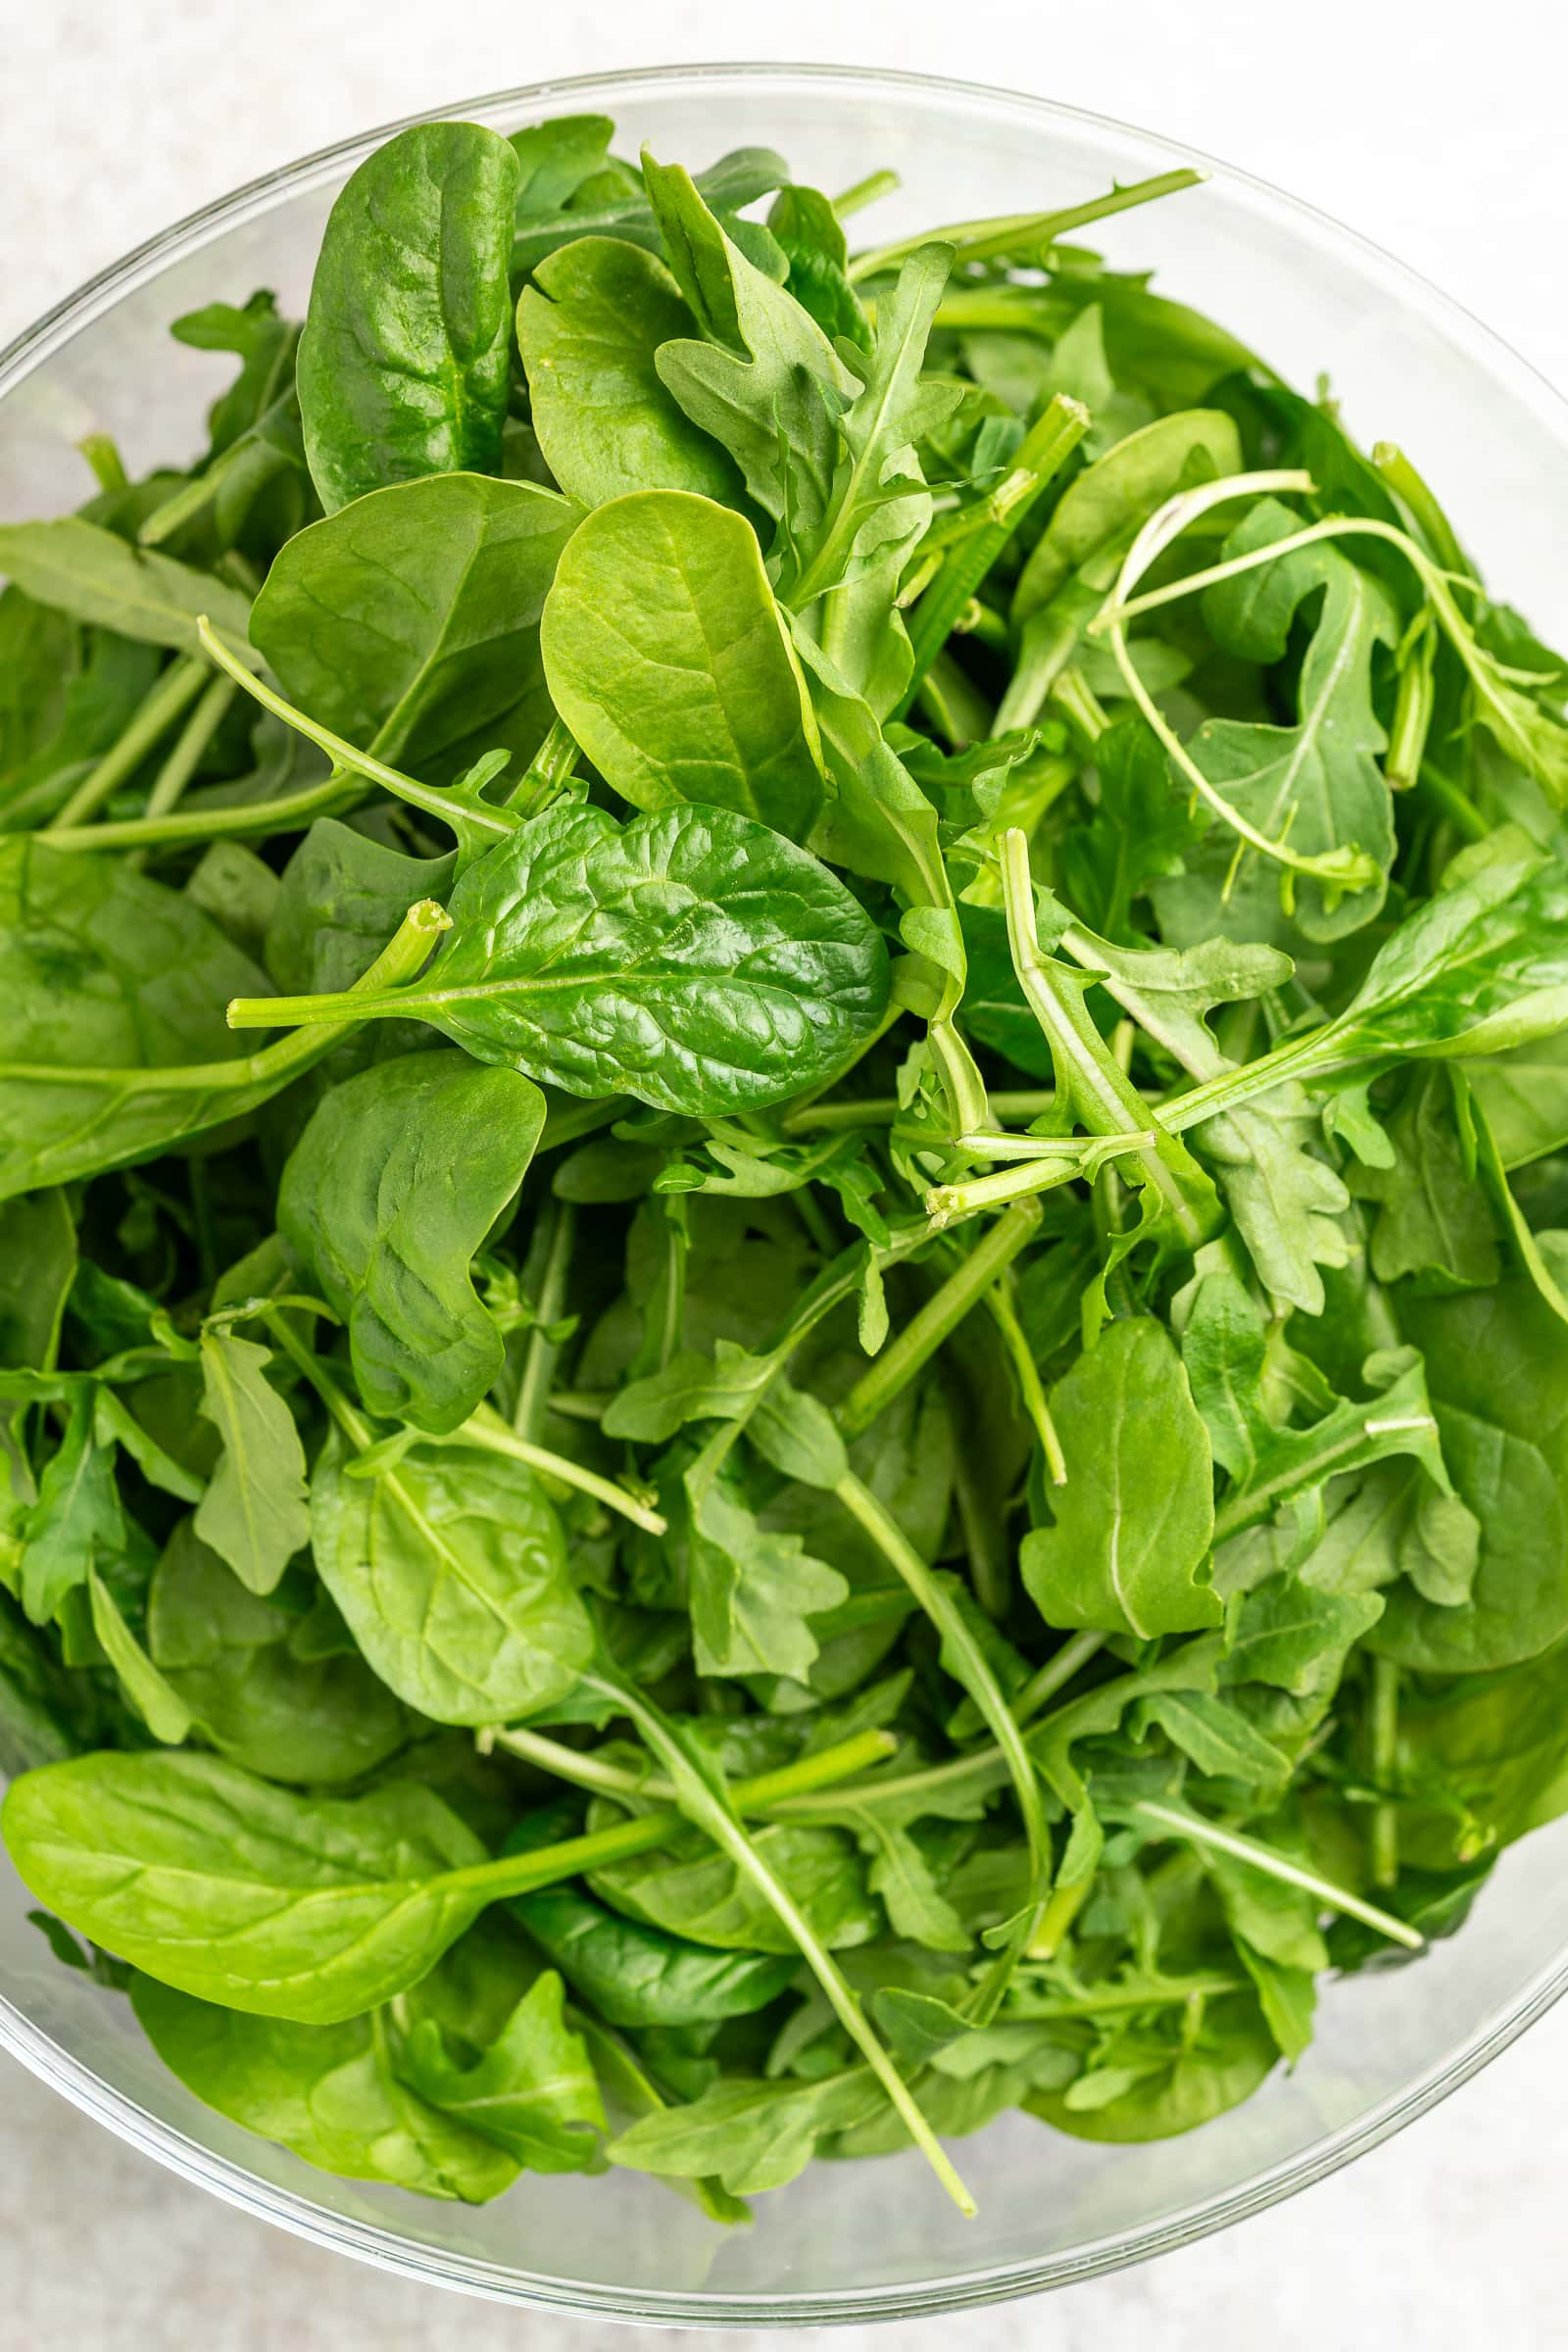 Arugula and baby spinach mixed together in a large bowl.